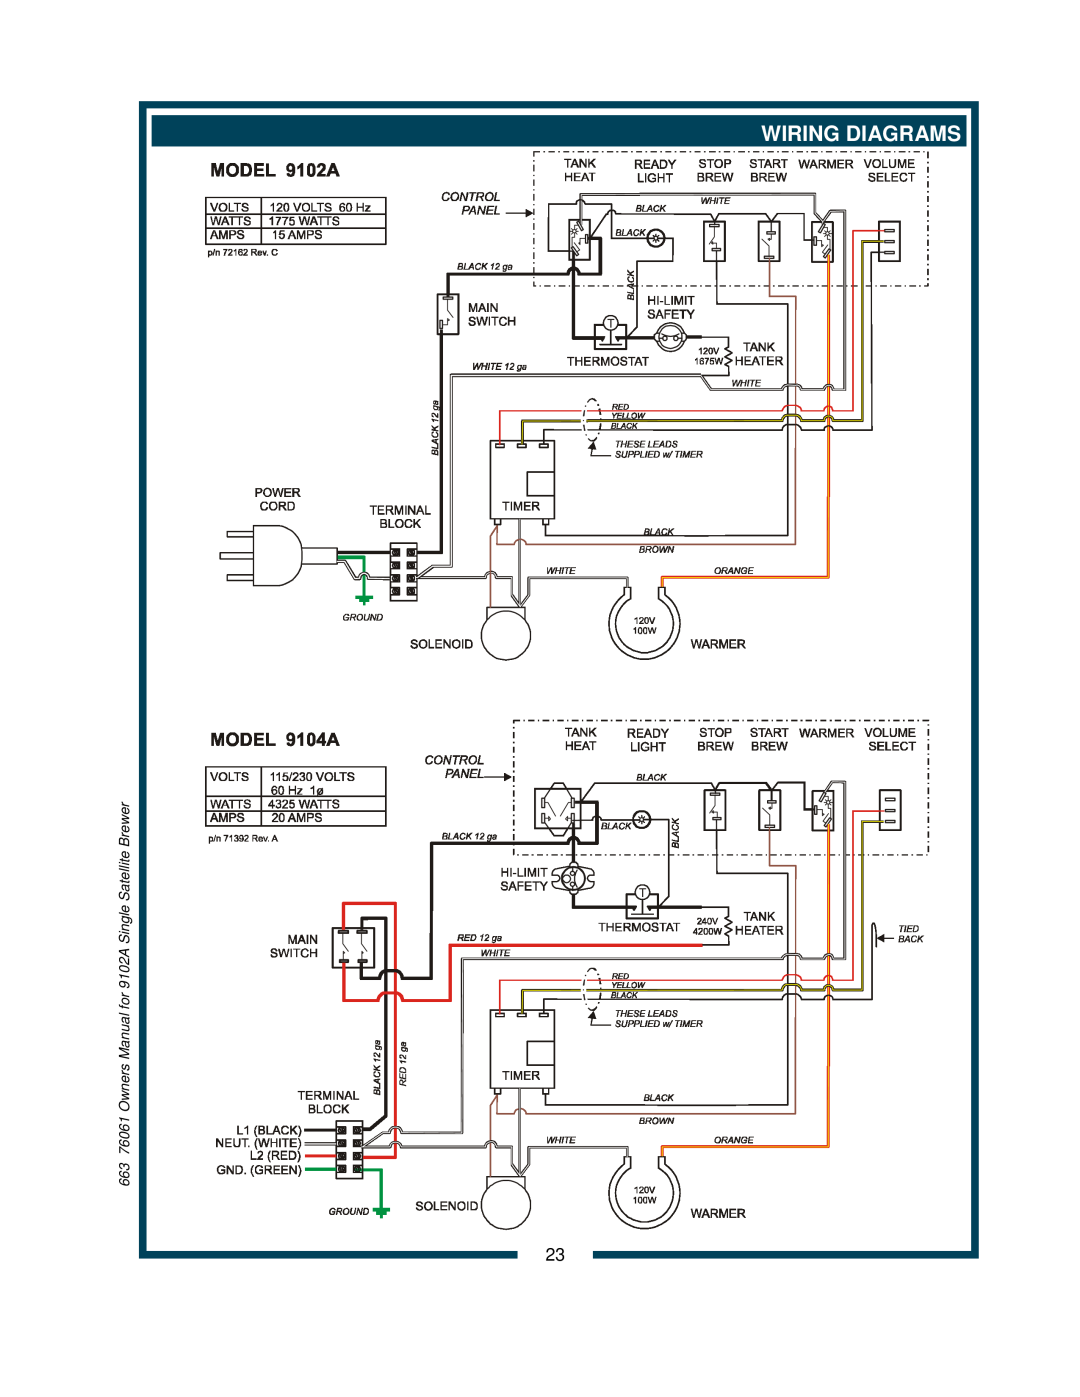 Bloomfield 9104A owner manual Wiring Diagrams, 663 76061 Owners Manual for 9102A Single Satellite Brewer 